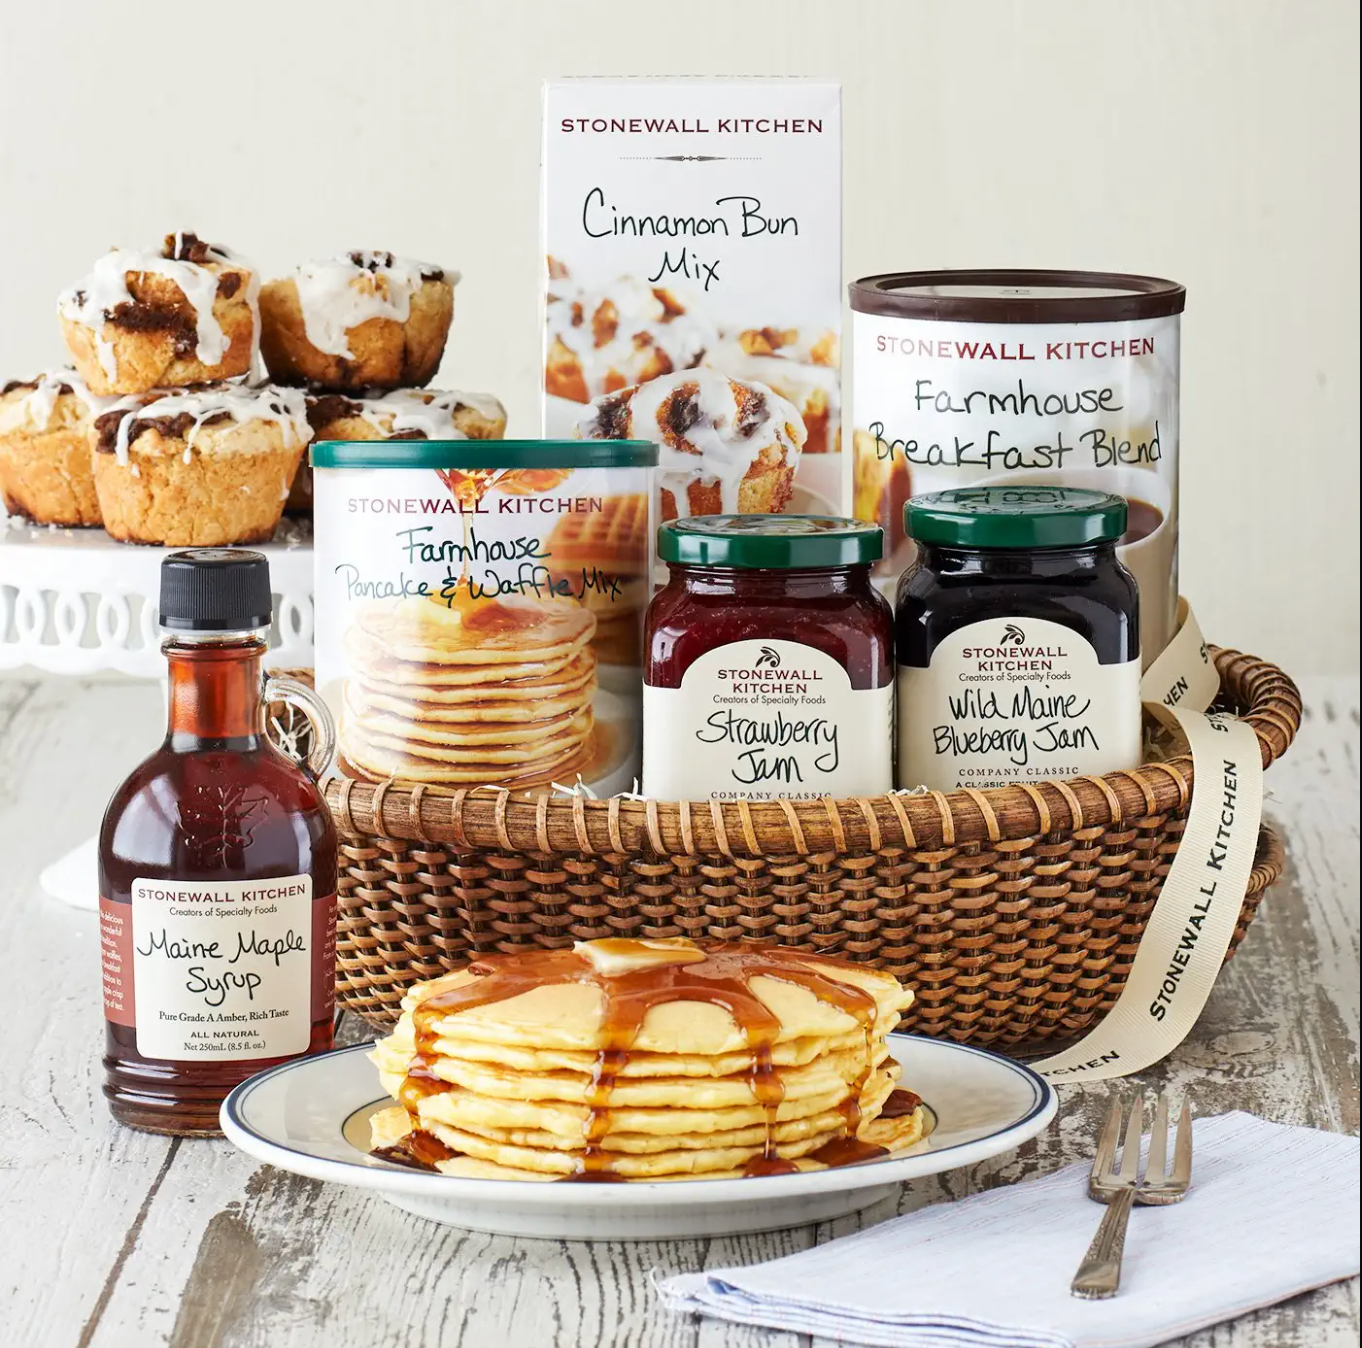 Brown wicker basket with two jars of jam, a container of pancake mix, a box of cinnamon bun mix, a container of coffee, behind a bottle of maple syrup and plate of stacked pancakes